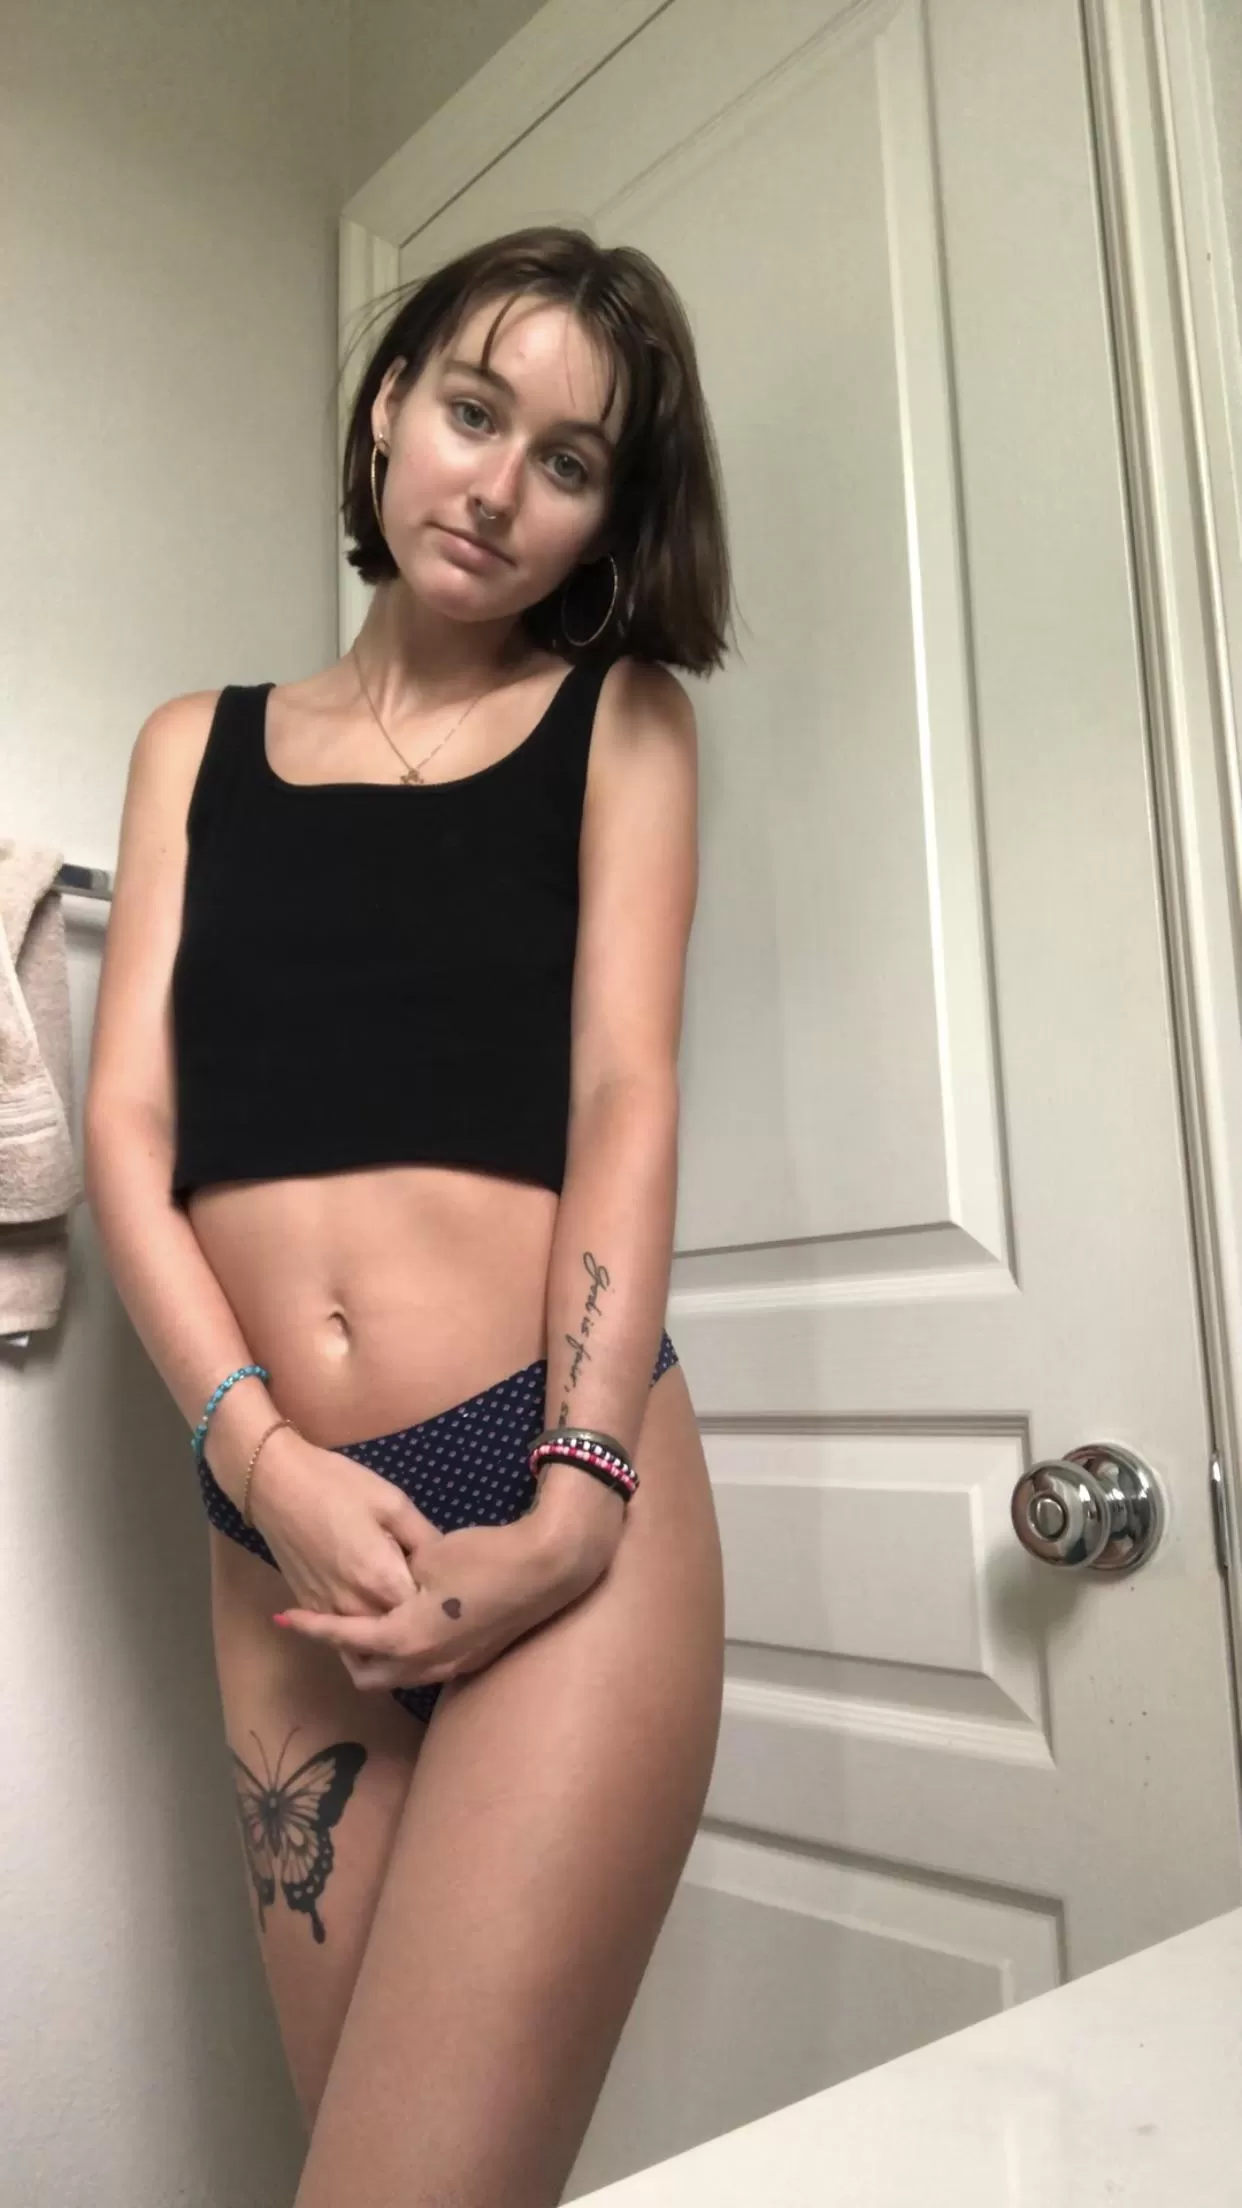 Short Haired Teen Nude